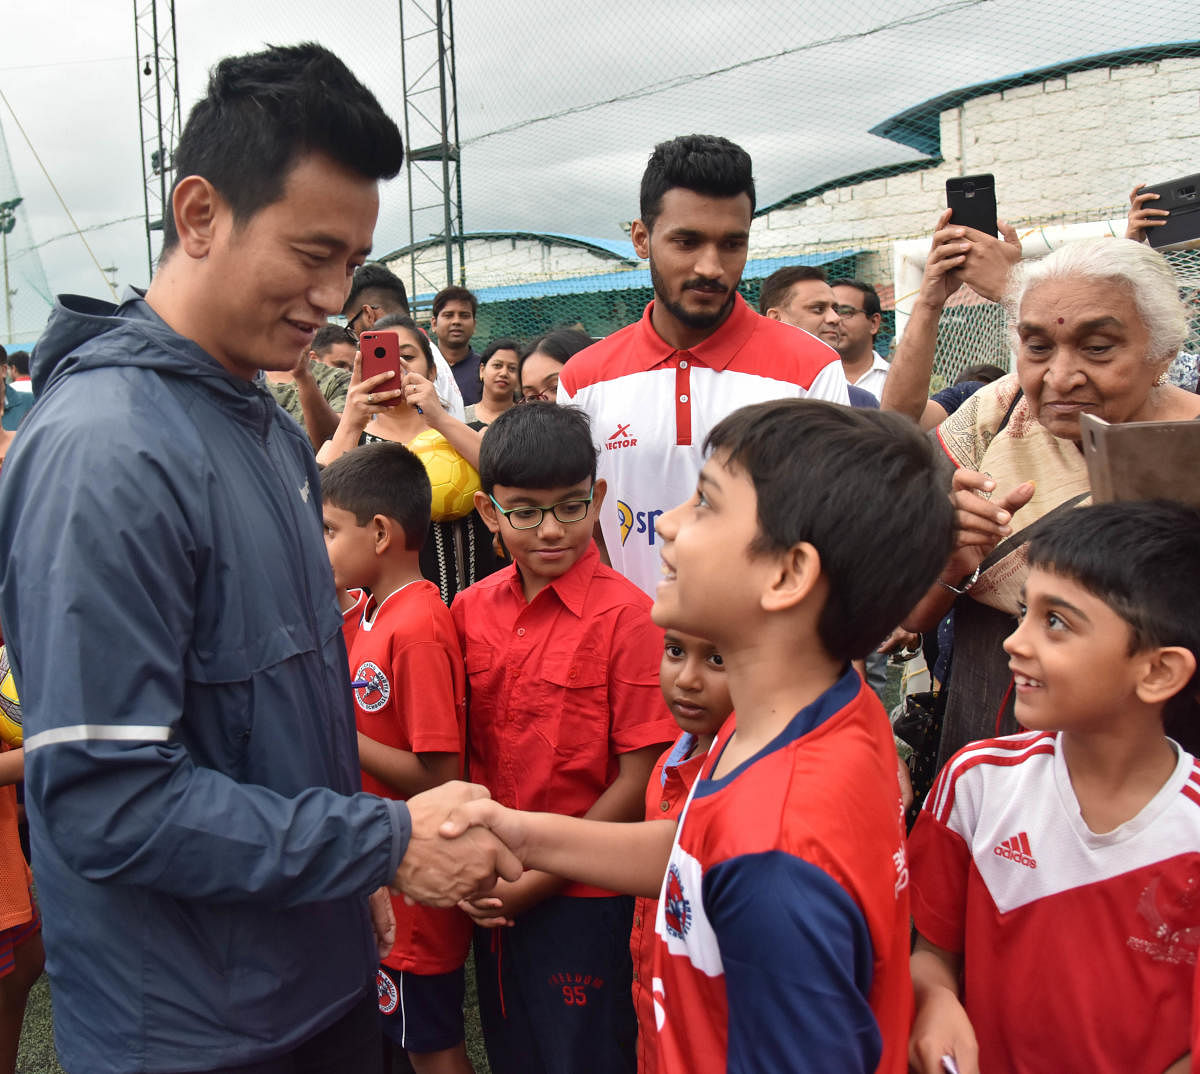 INSPIRATION Bhaichung Bhutia with aspiring young players during a promotional event on Sunday. DH PHOTO/ BK JANARDHAN